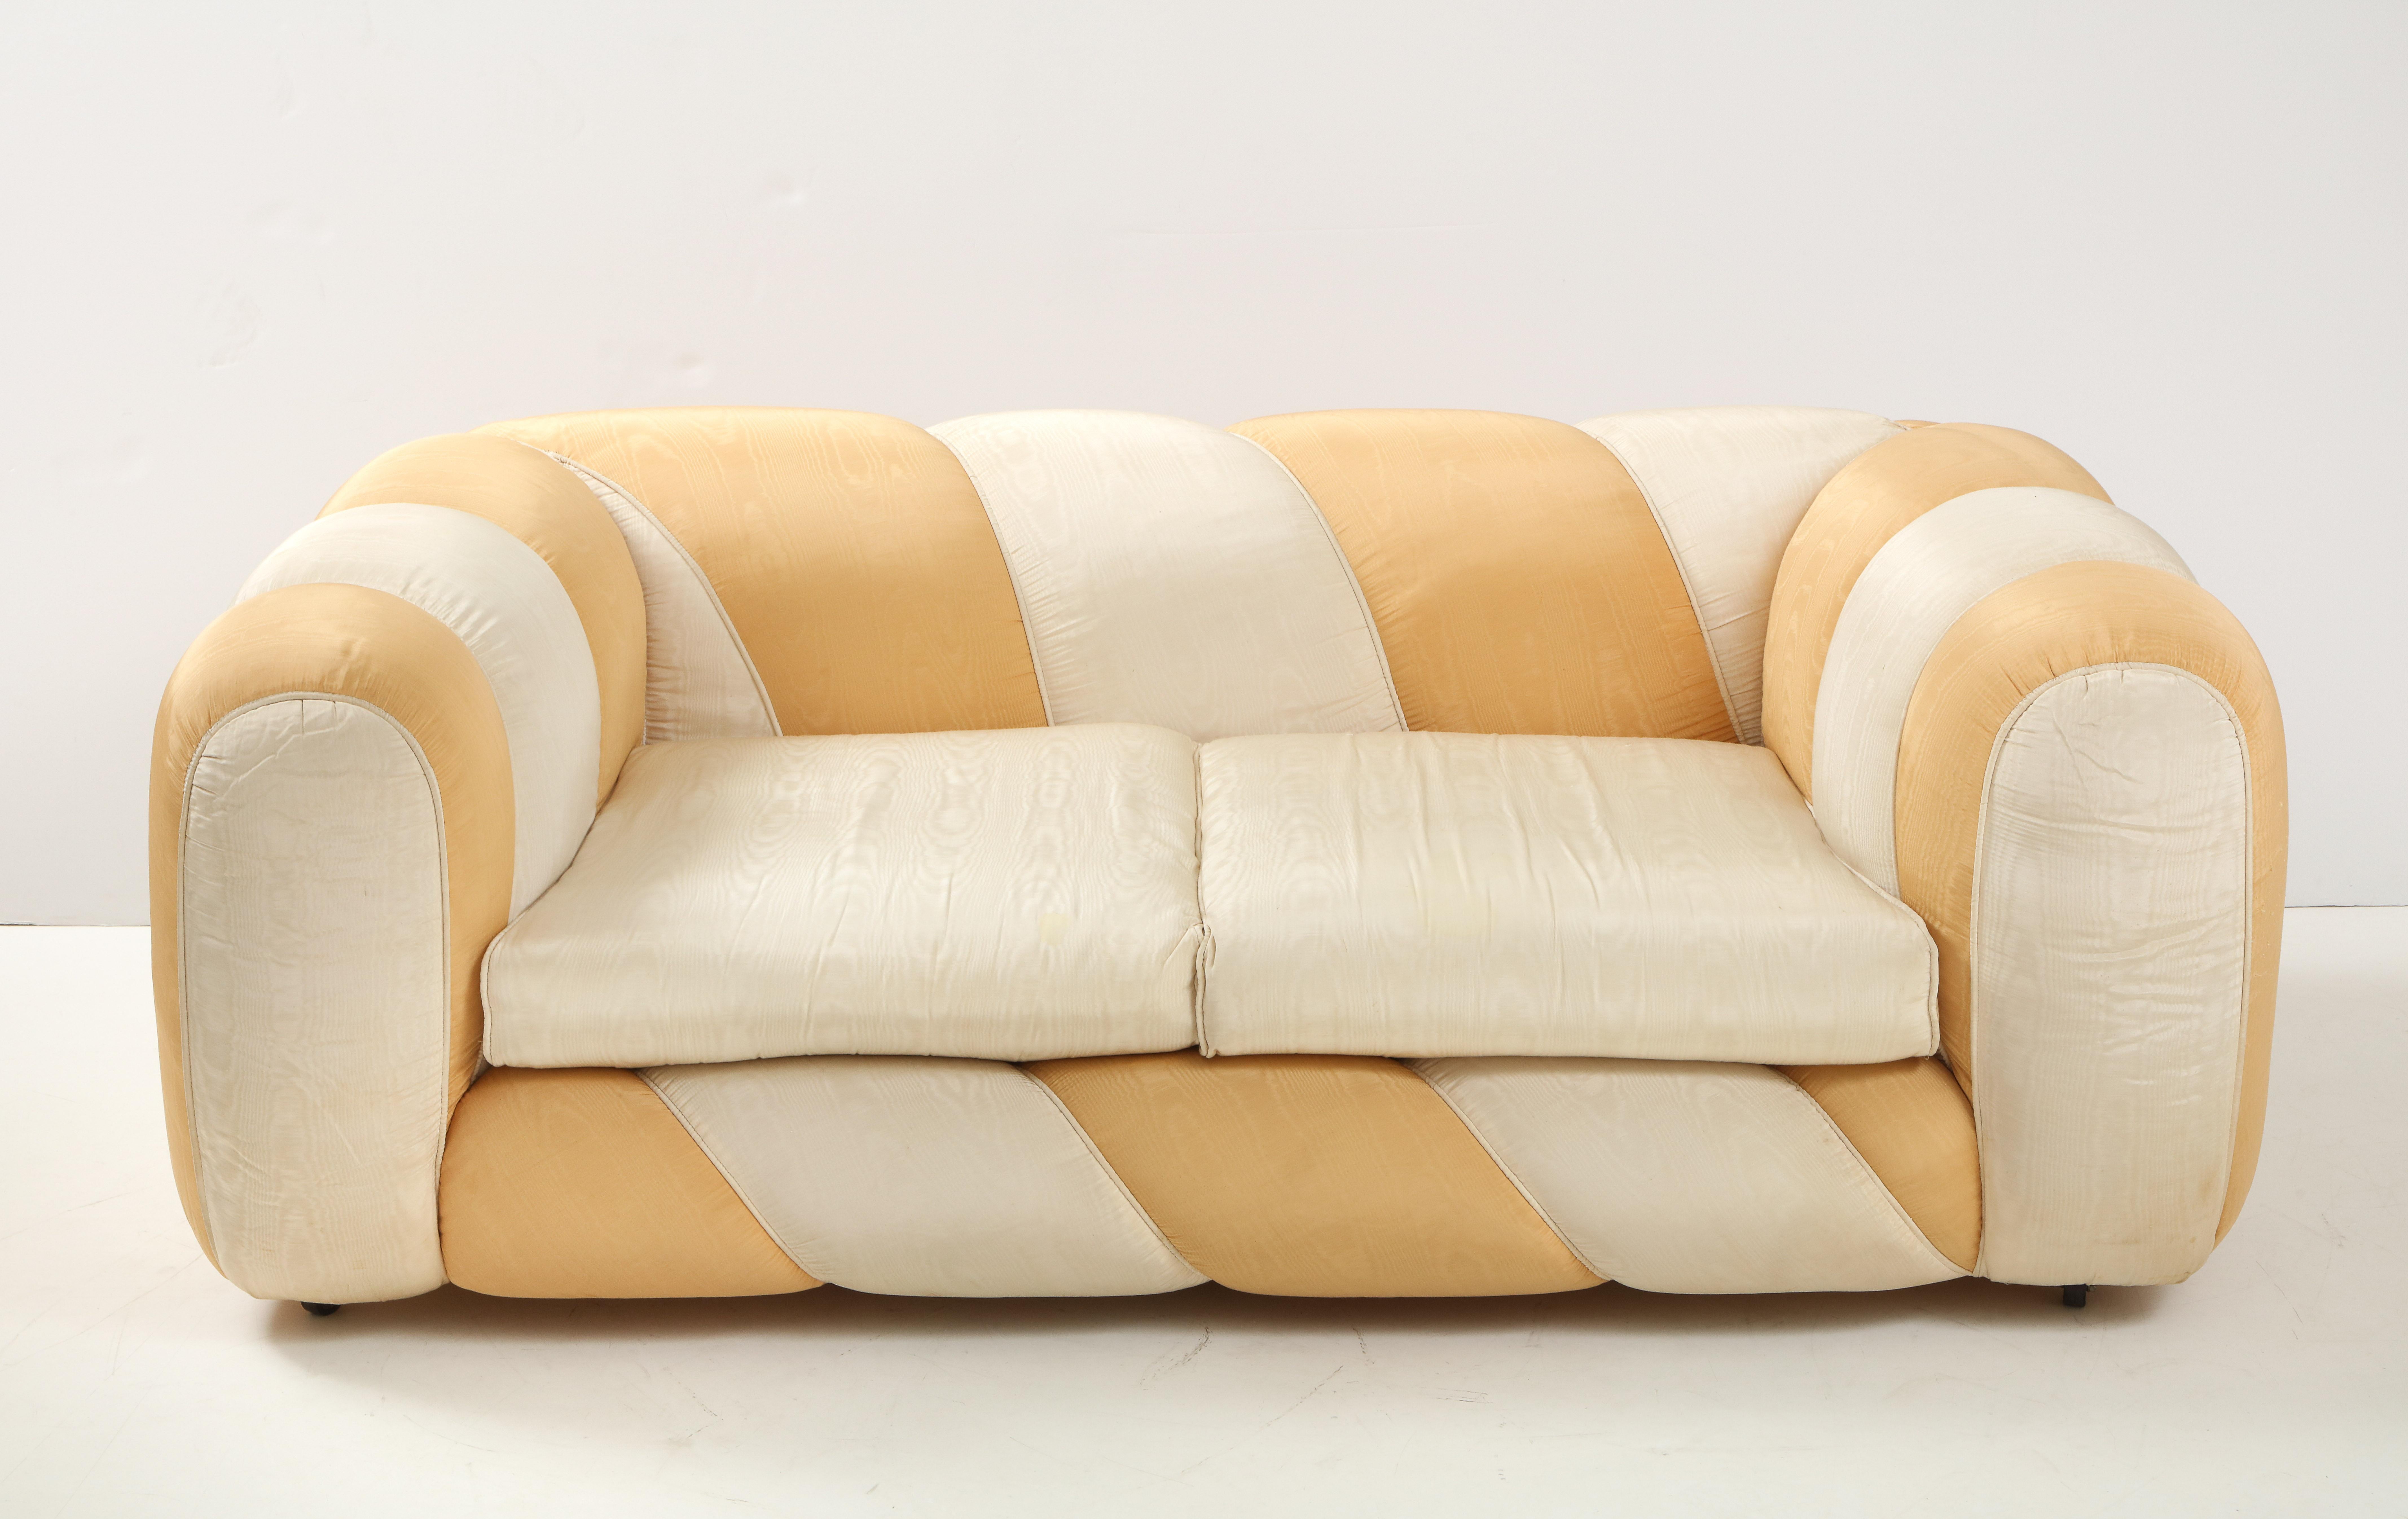 A vibrant and cheerful Vivai del Sud two seat sofa in gold and cream silk moire fabric; original upholstery. The smooth and sensuous form, combined with the sweet color, creates an almost candy-like appearance. The design, fabrication and form are